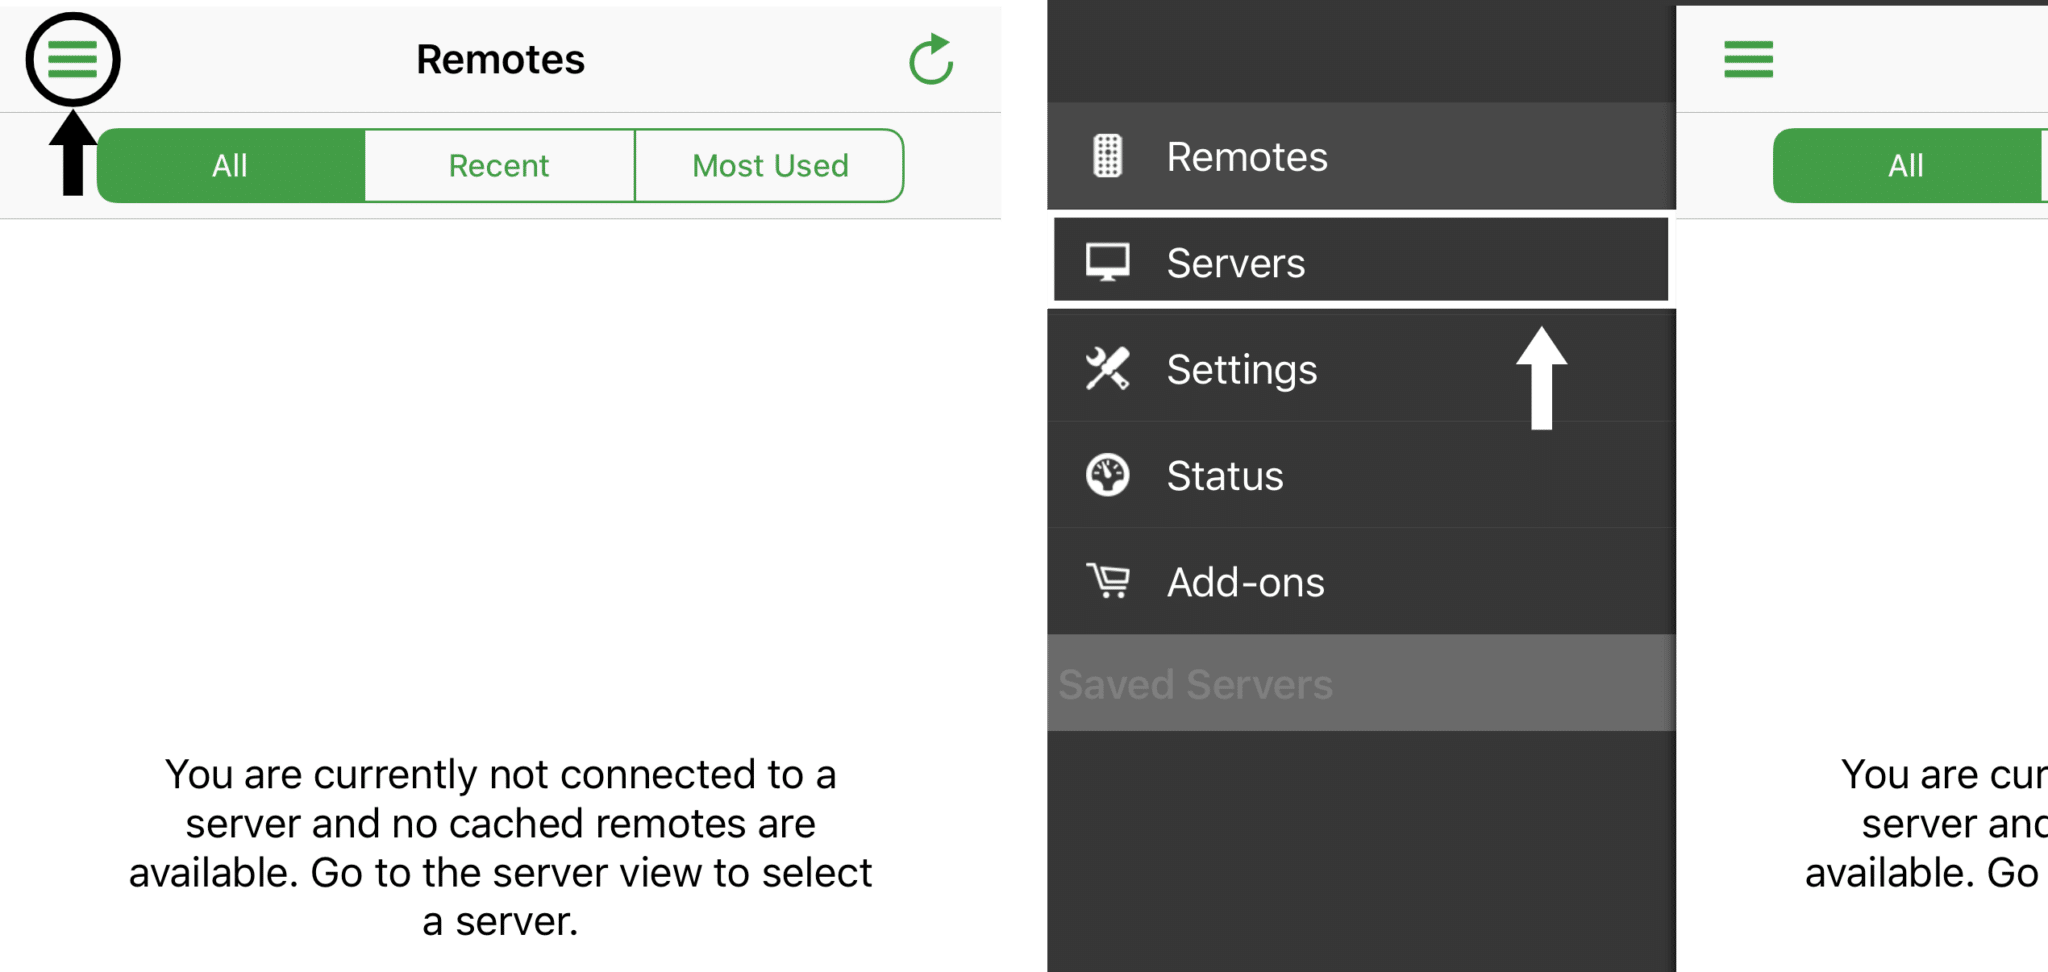 Use your phone as remote for PC